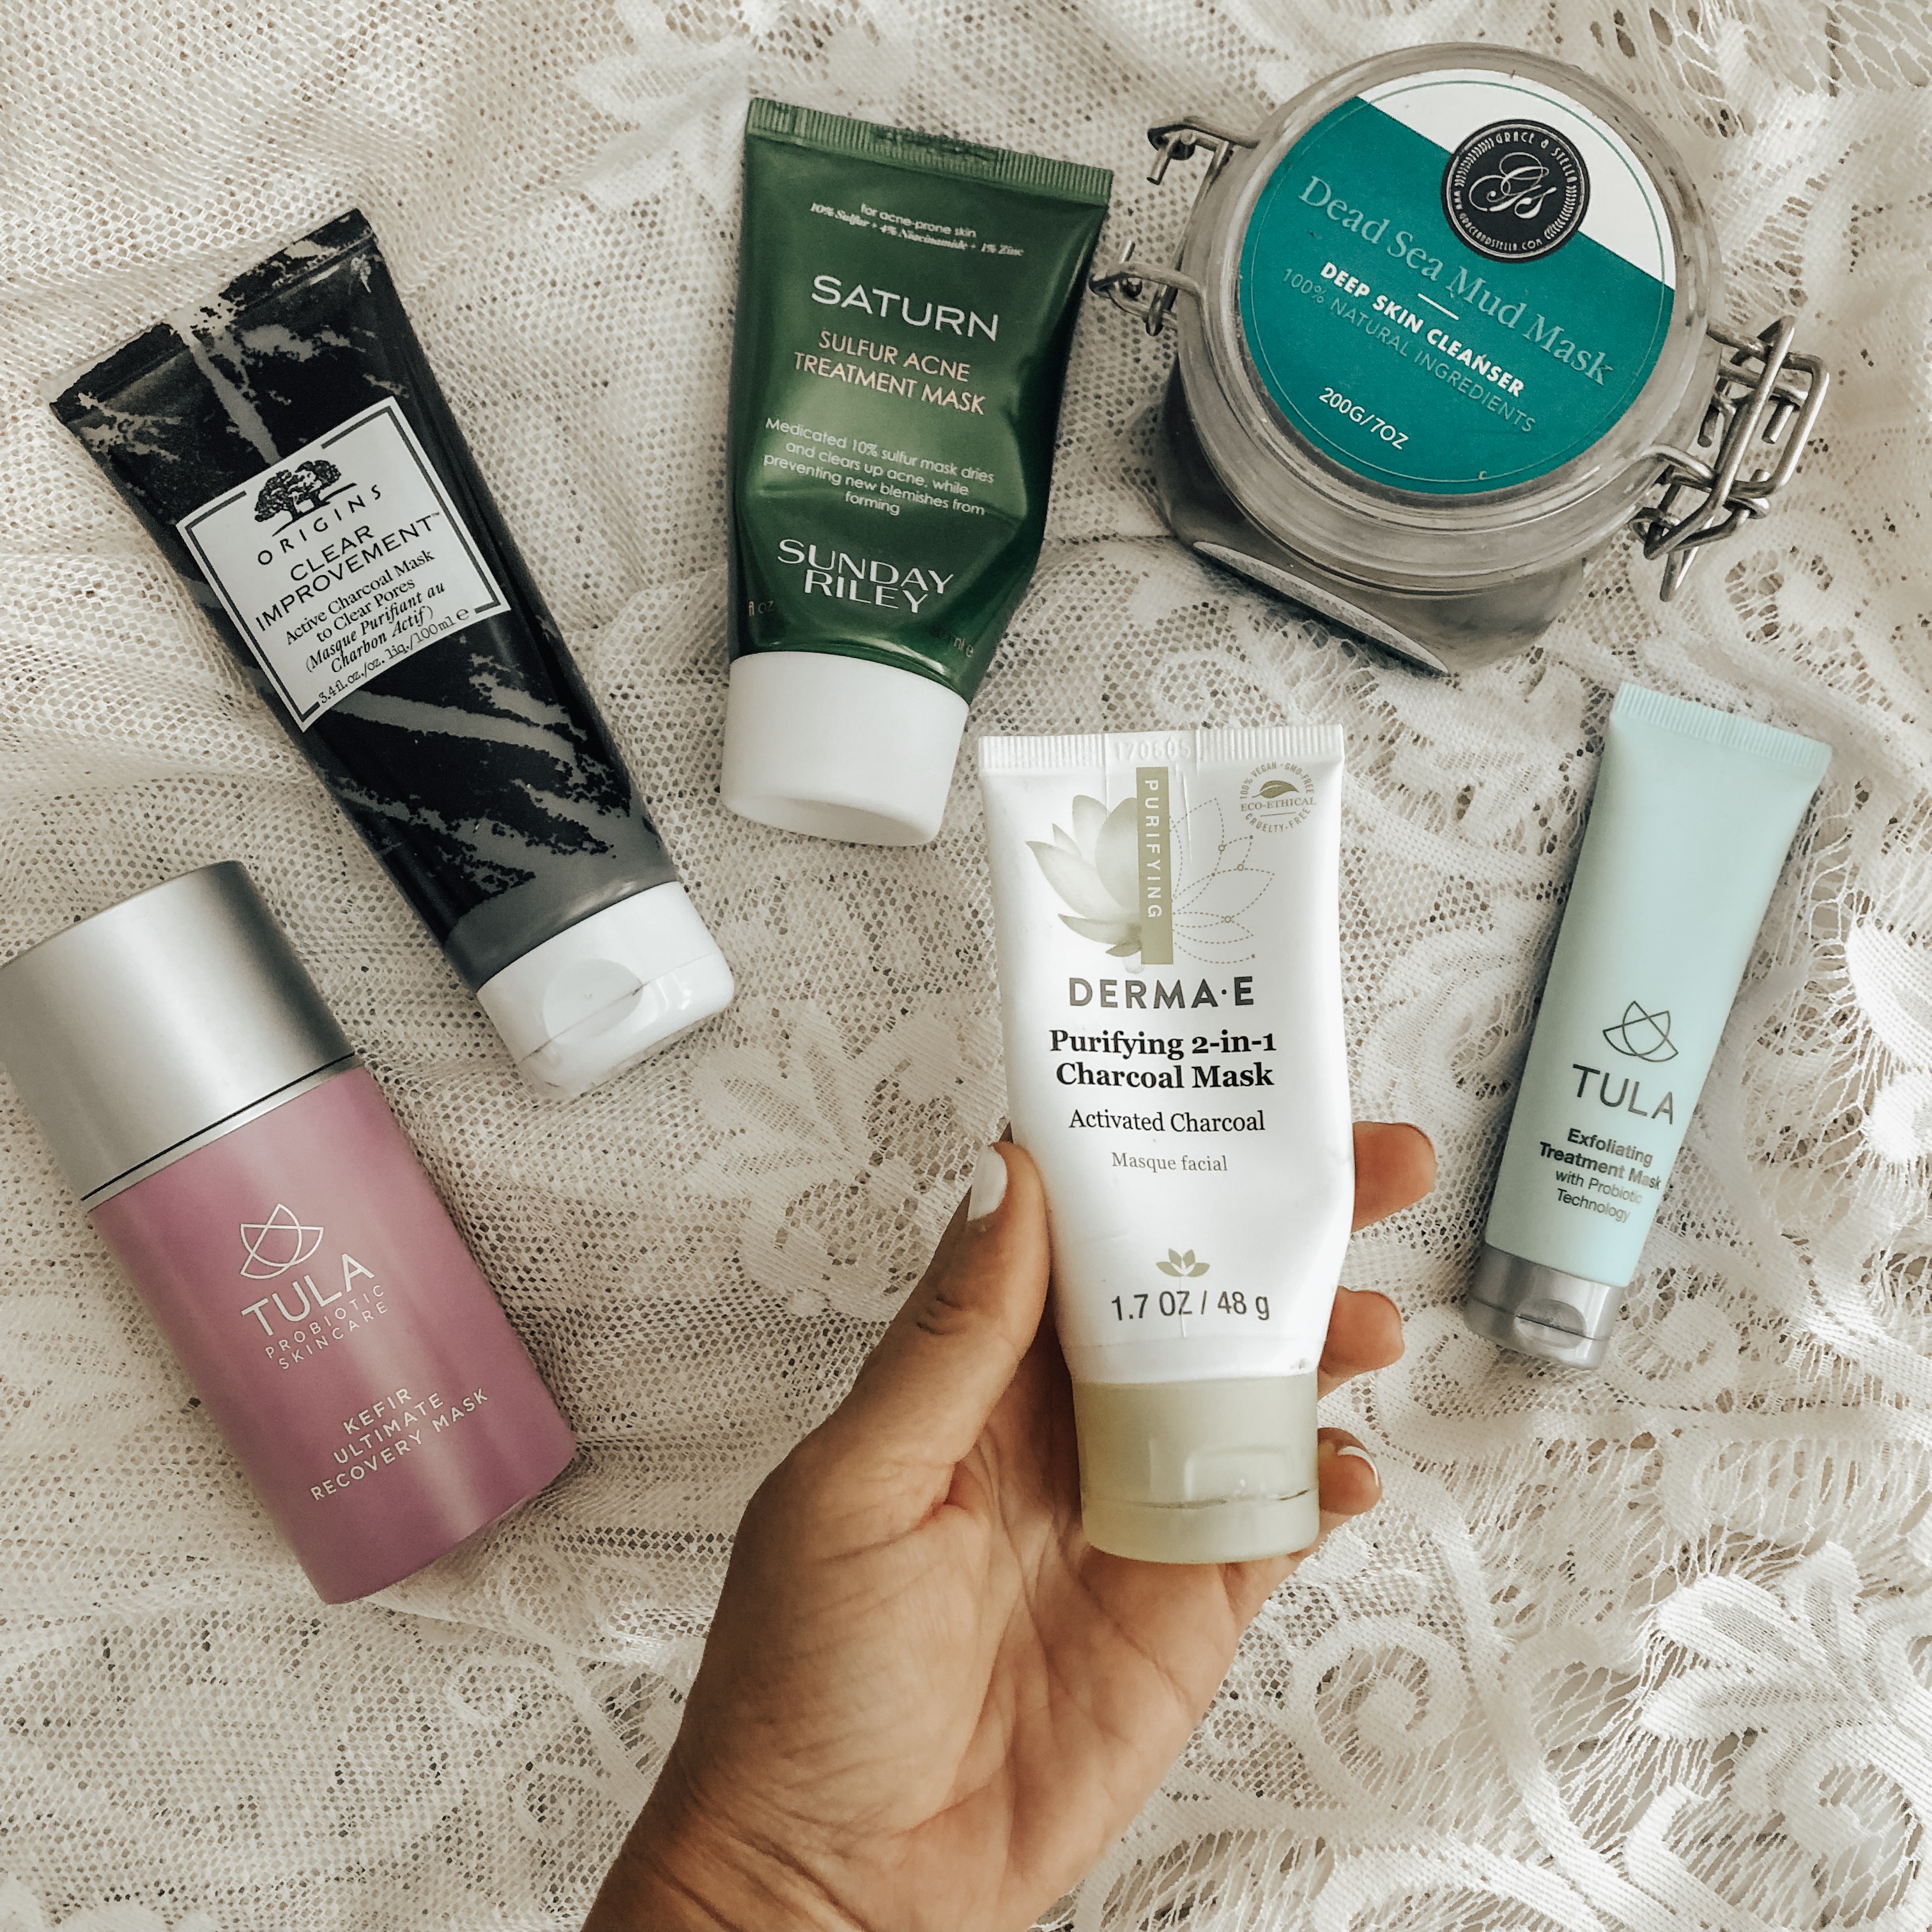 FACE MASKS TO TRANSFORM YOUR SKIN- MY CURRENT FAVORITES + Jaclyn De Leon Style + Do you have dull or acne prone skin that needs a boost? I'm dishing on my current must-have face masks that will completely revitalize your skin. Add them to your skincare routine 1-2 times per week and it will change your life.